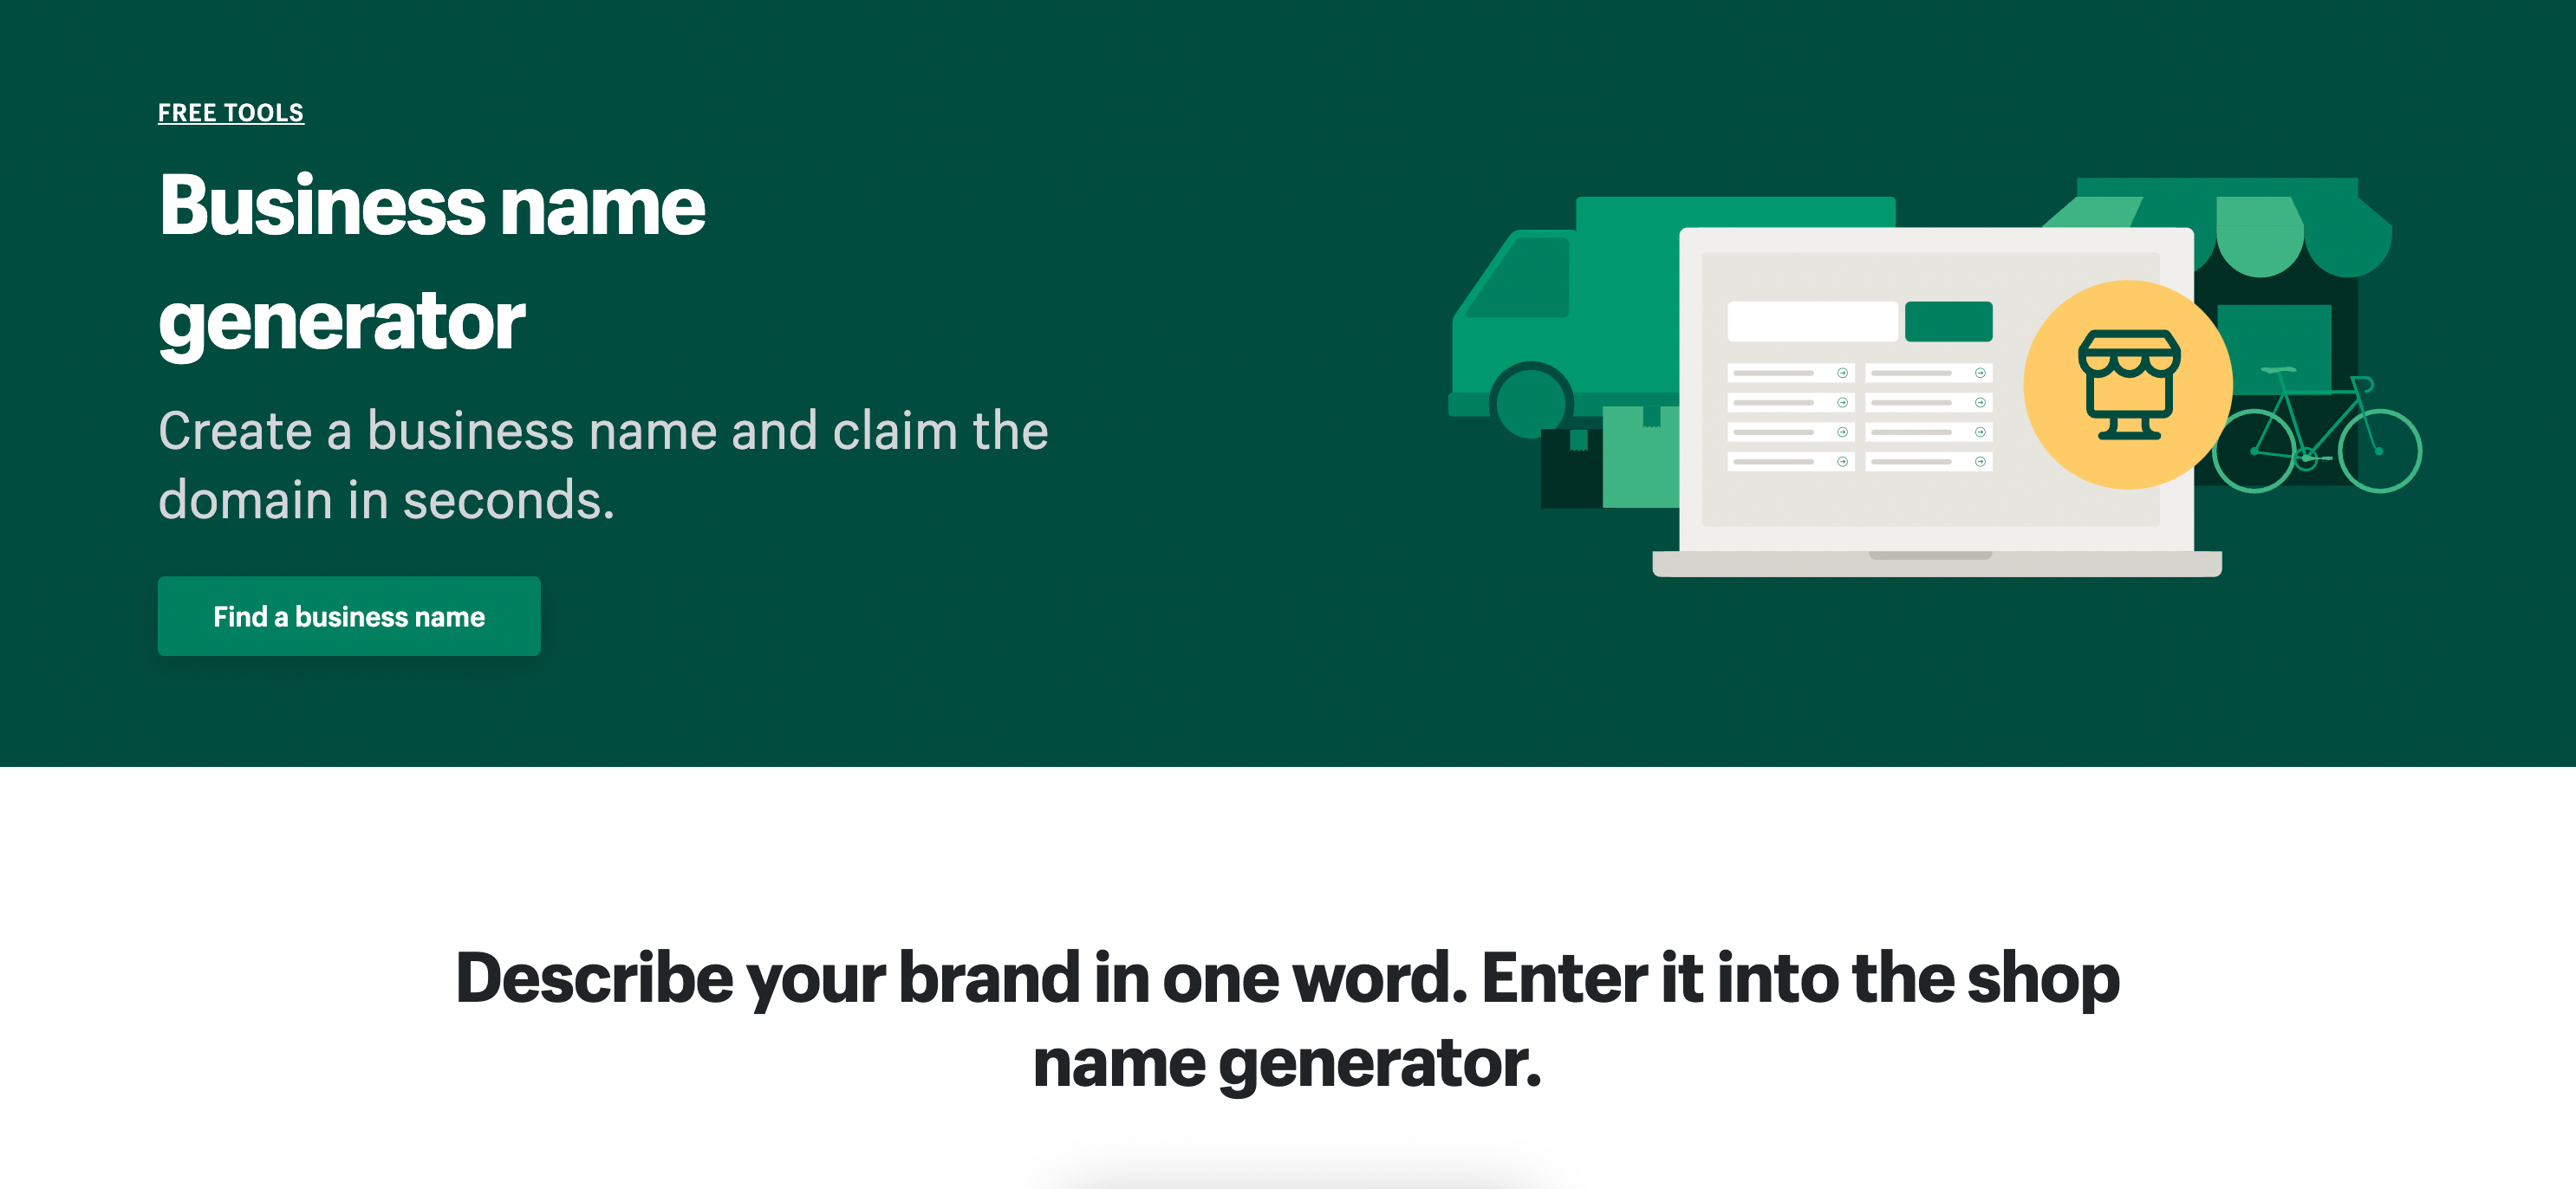 Shopify's business name generator is the first step to registering your business